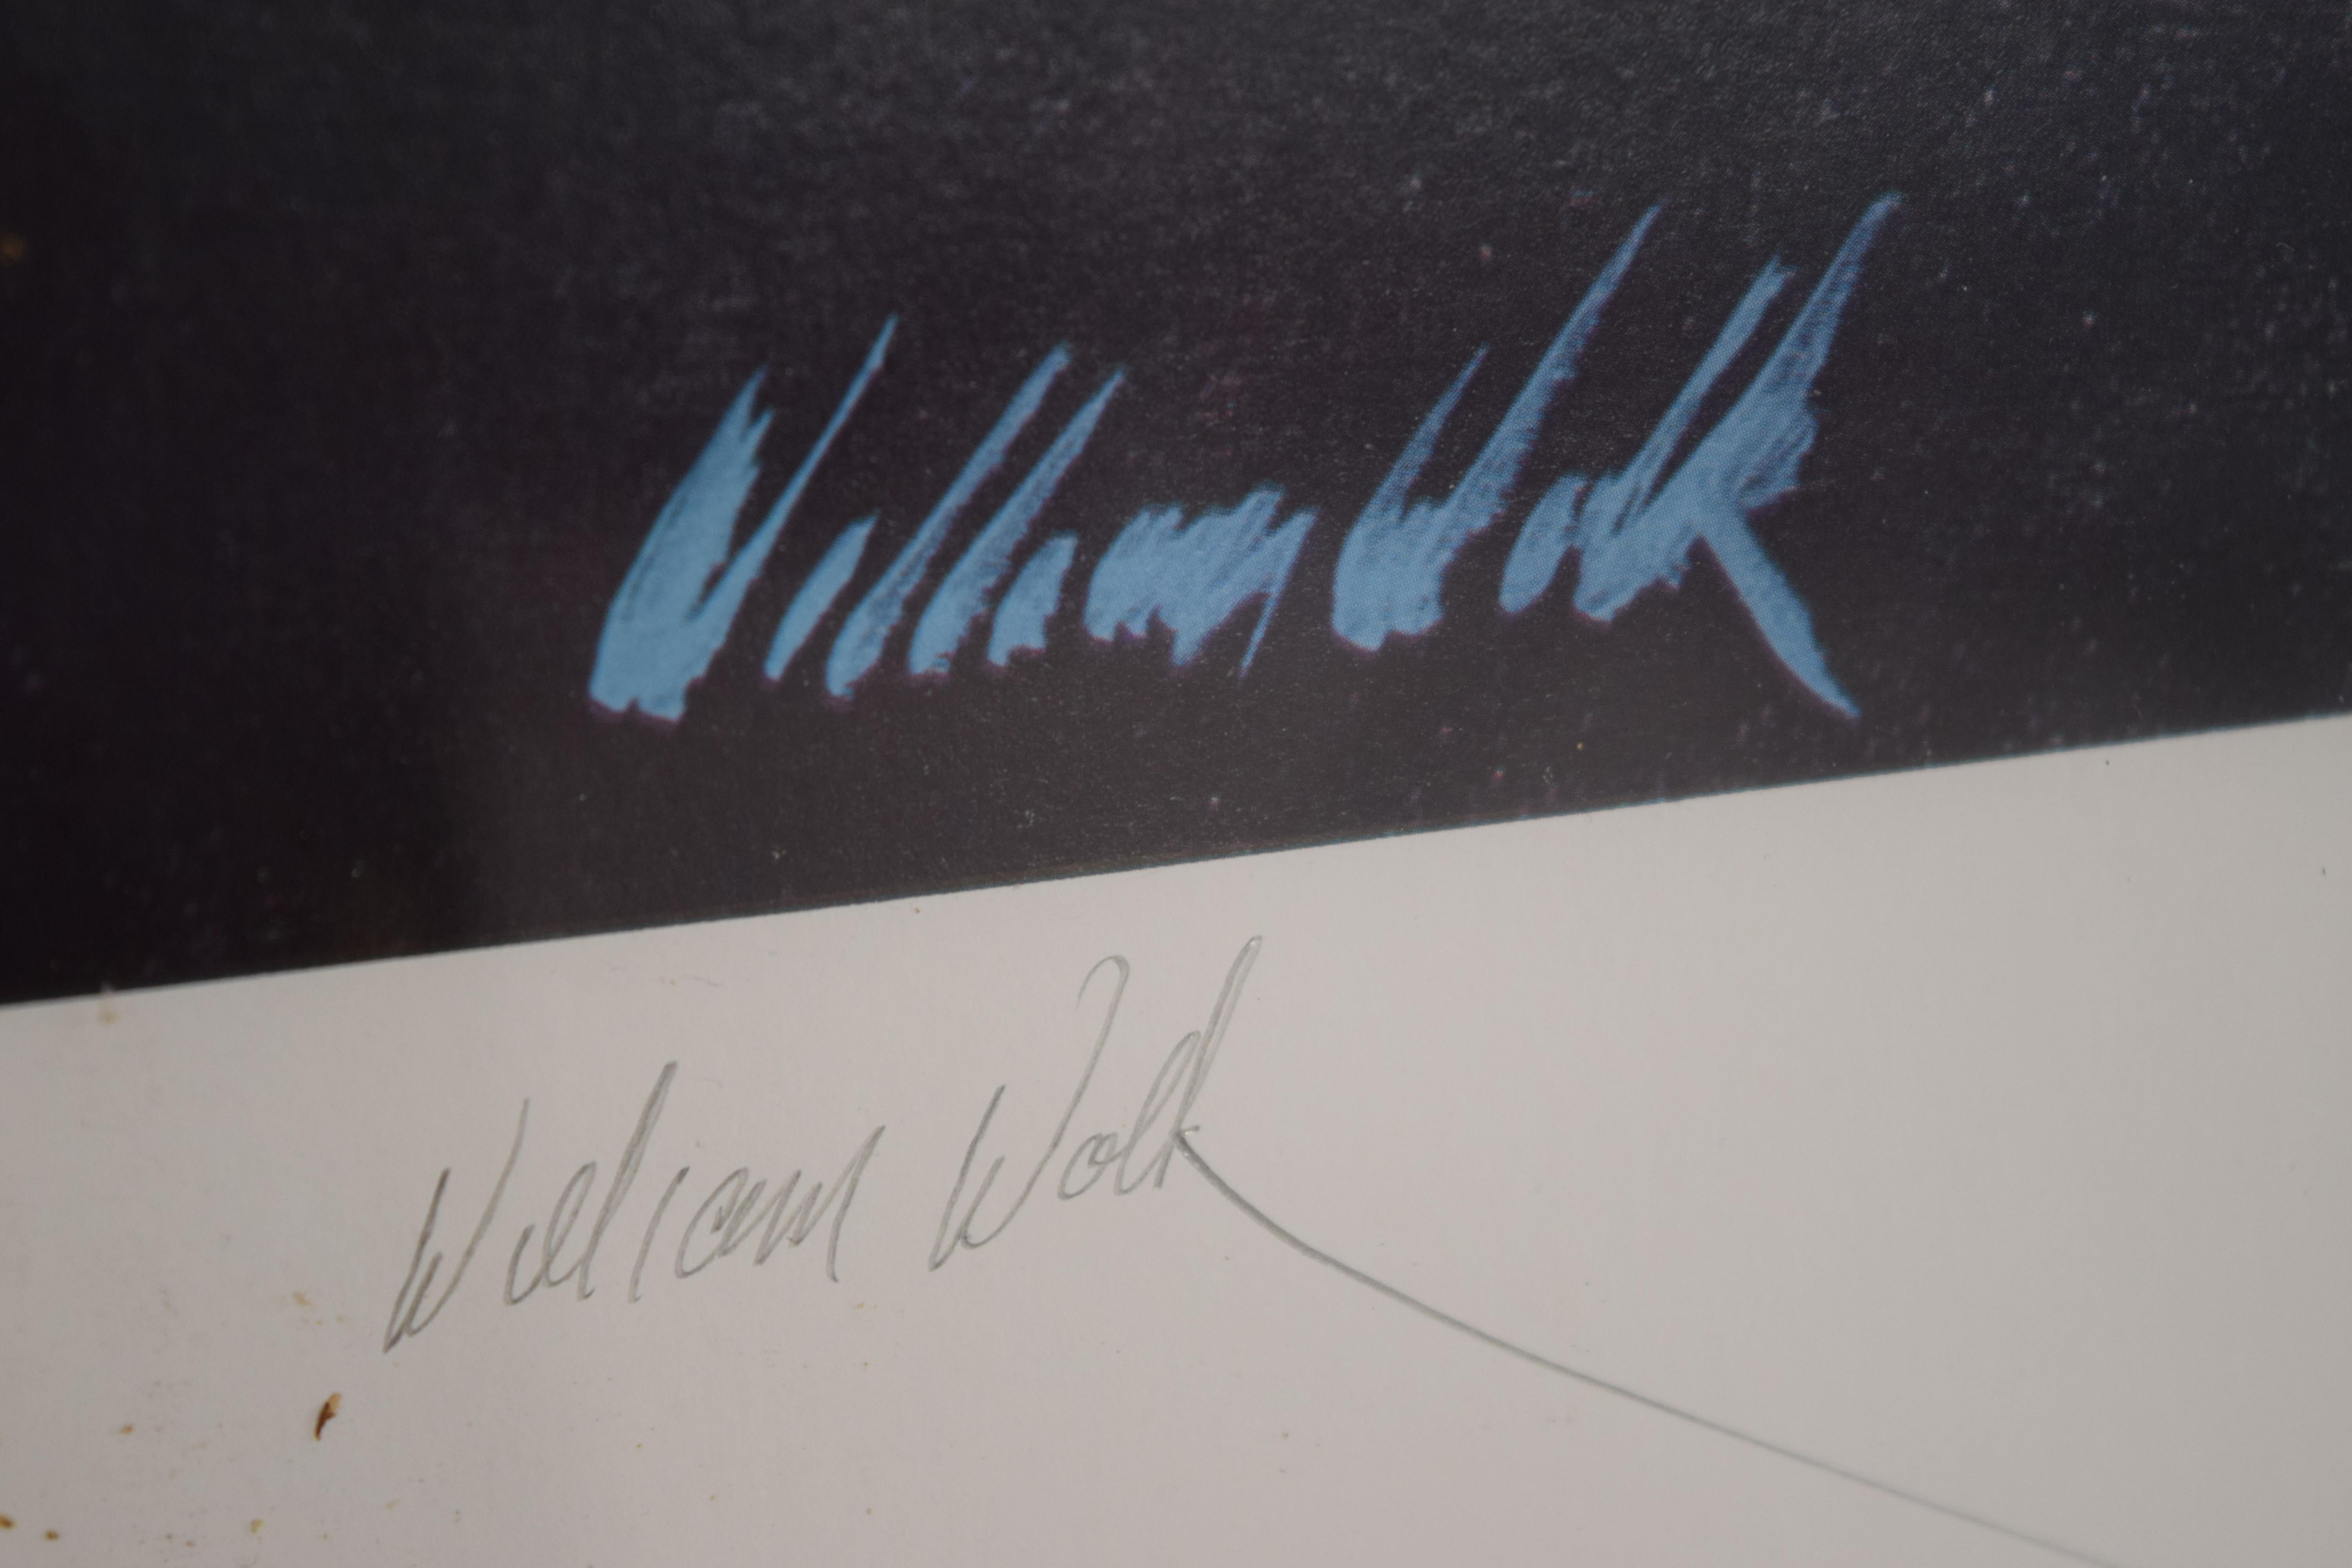 American William Wolk 1982 Signed Poster For Sale